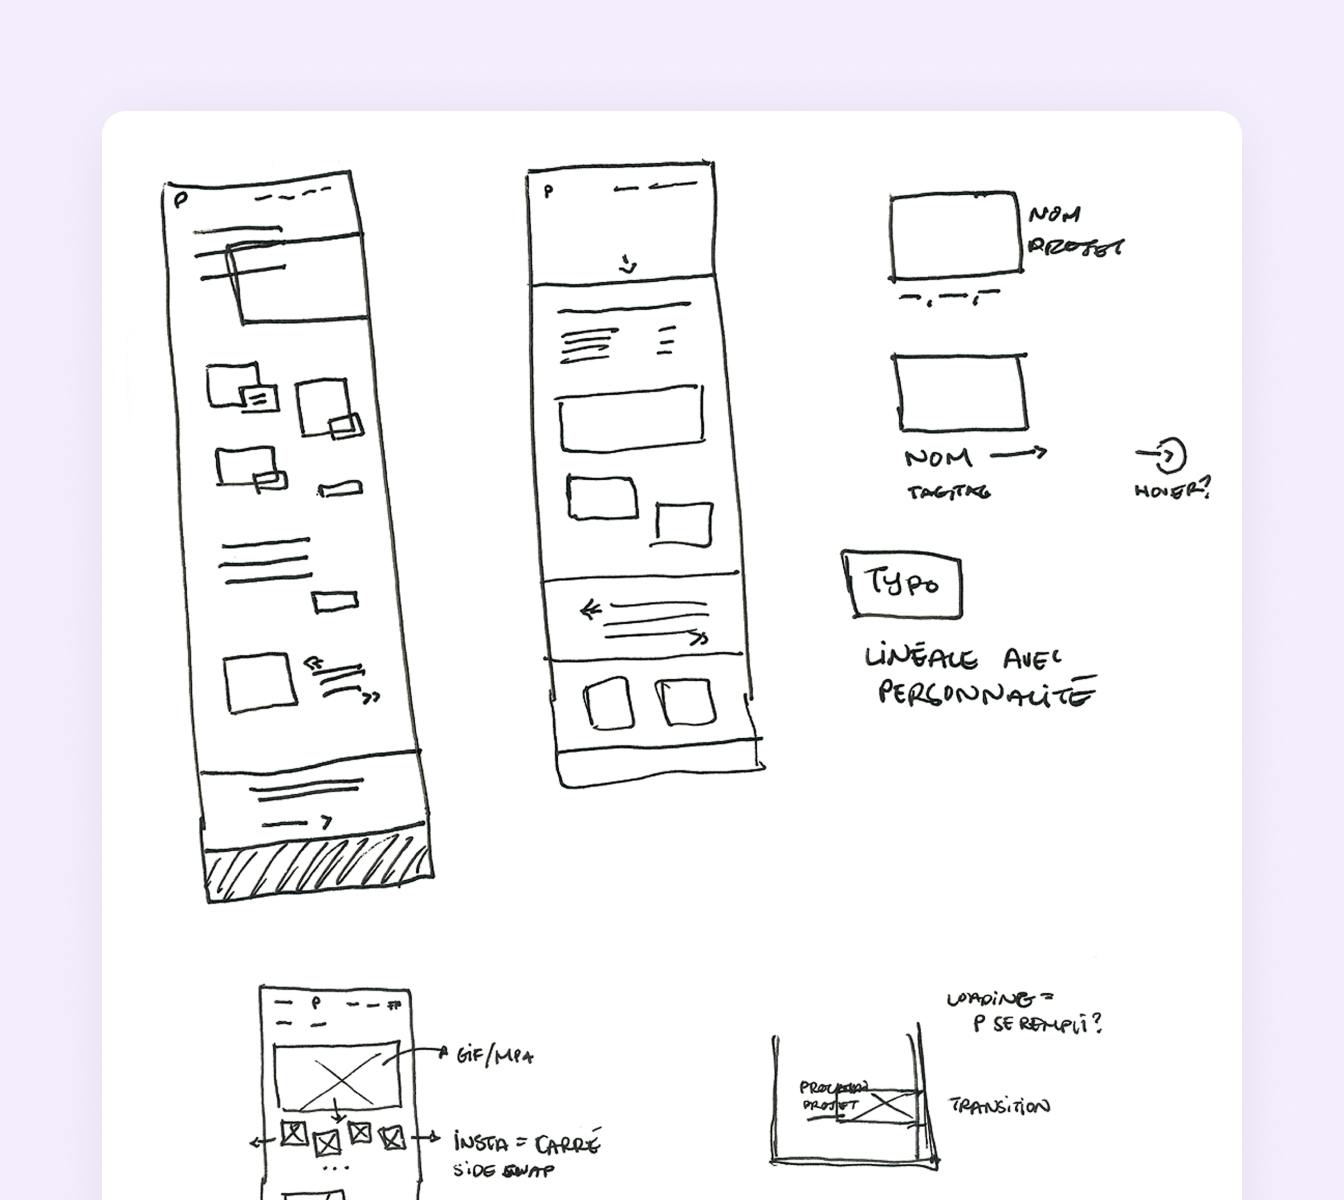 <p>Initial sketches and explorations for portfolio layout.</p>